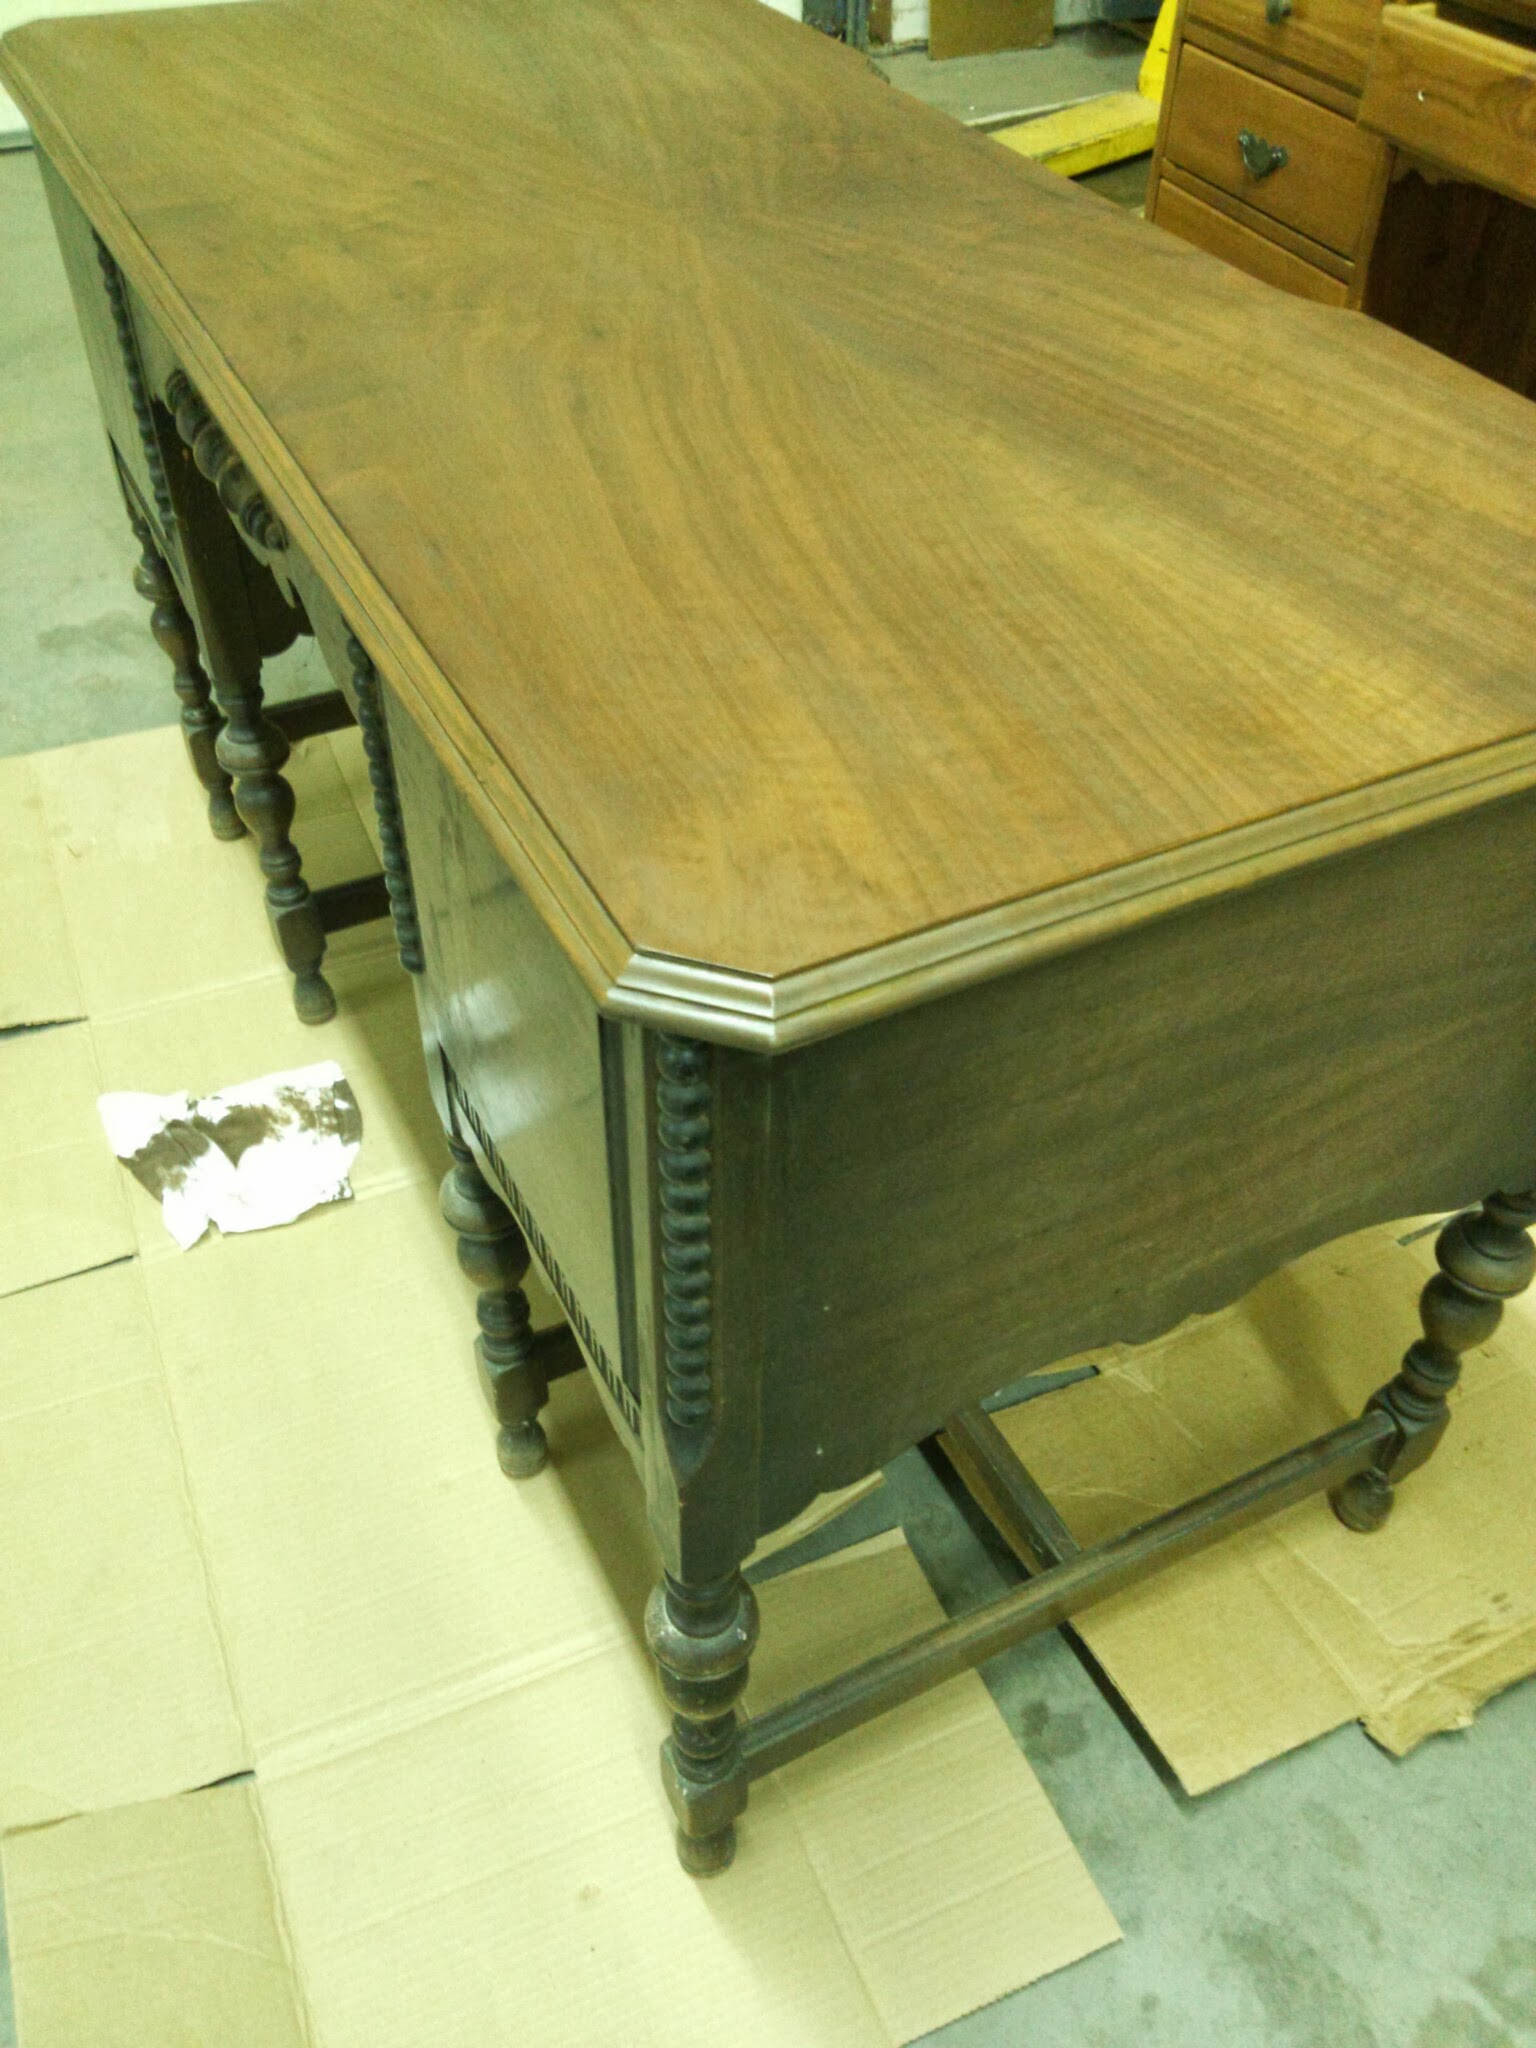 Postcards from the Ridge:  How to refinish furniture tutorial with complete instructions.